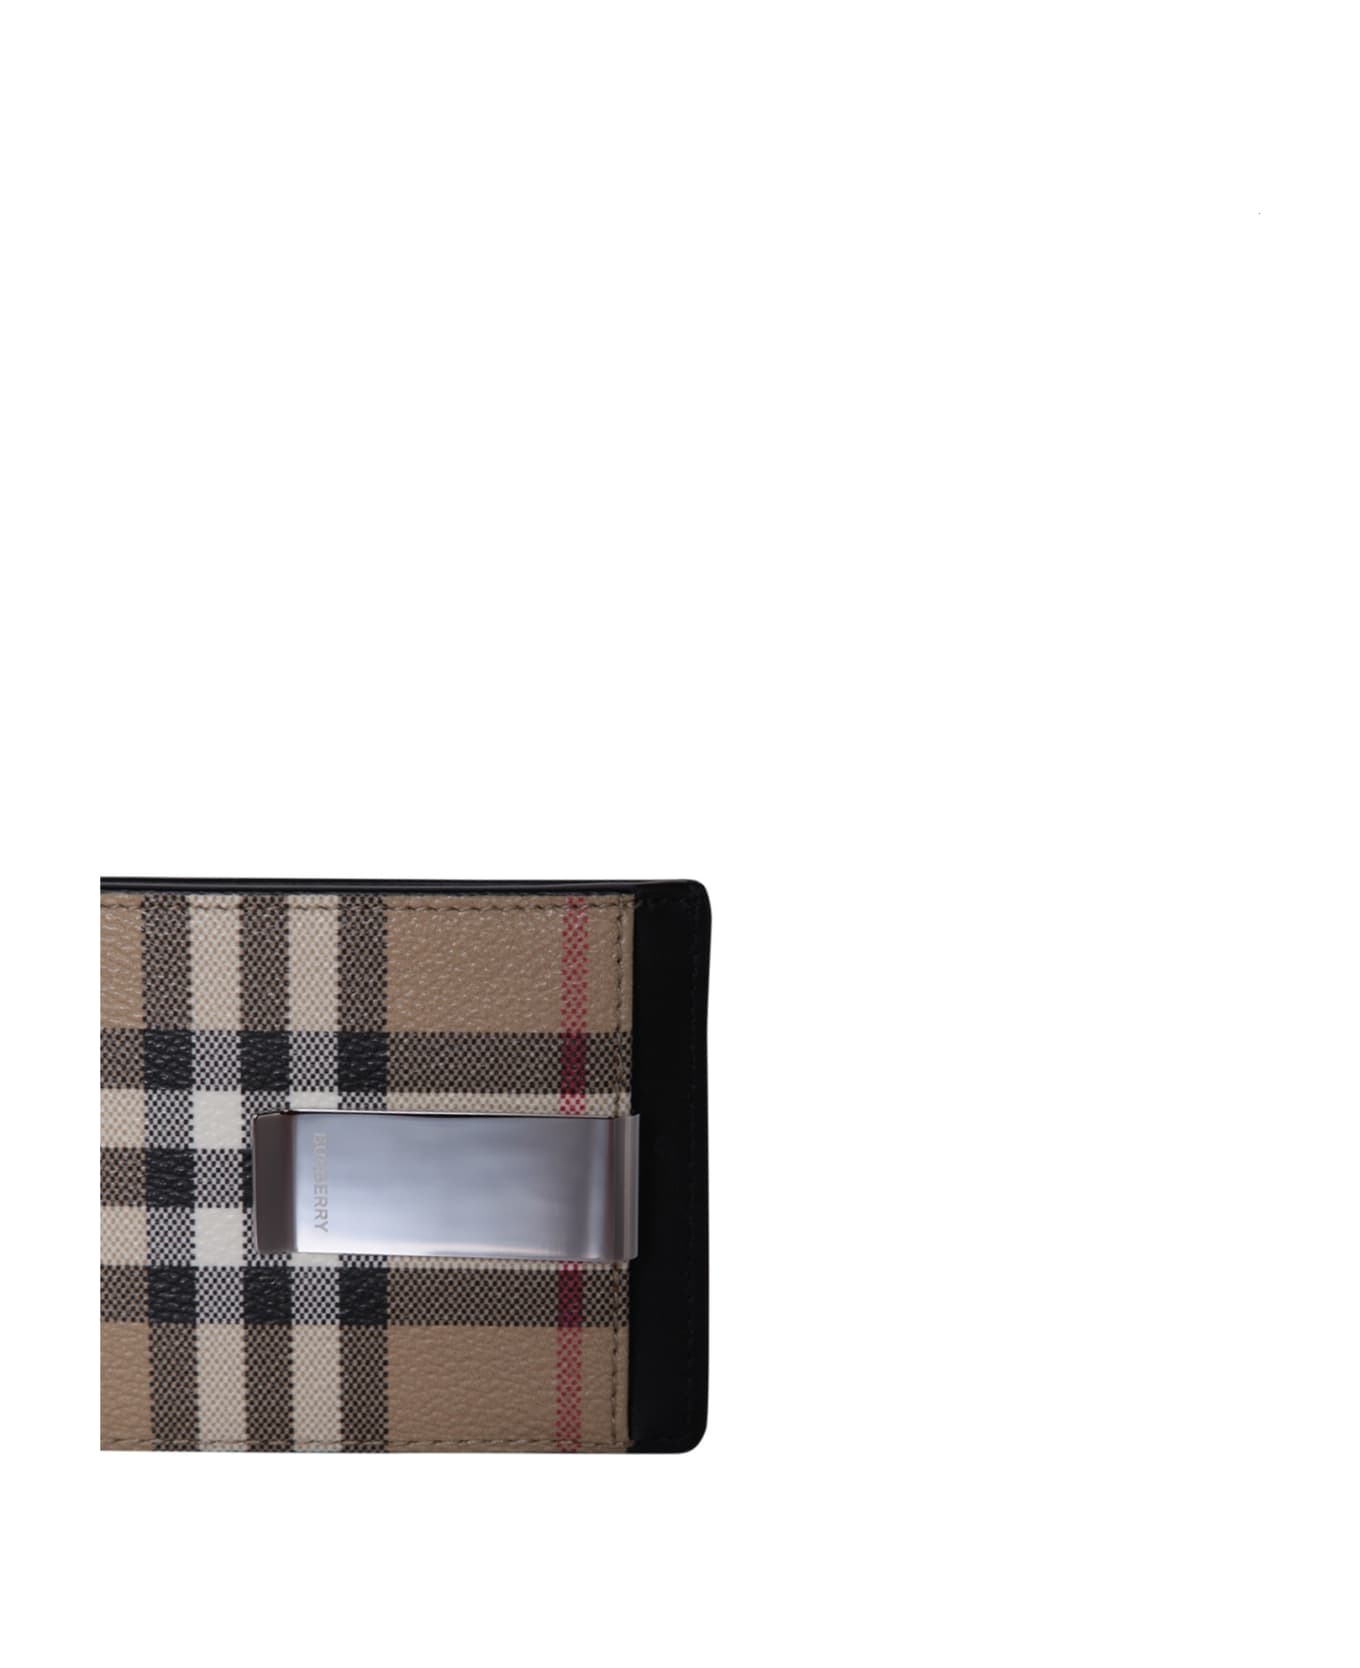 Burberry Printed Canvas Card Holder - ARCHIVEBEIGE